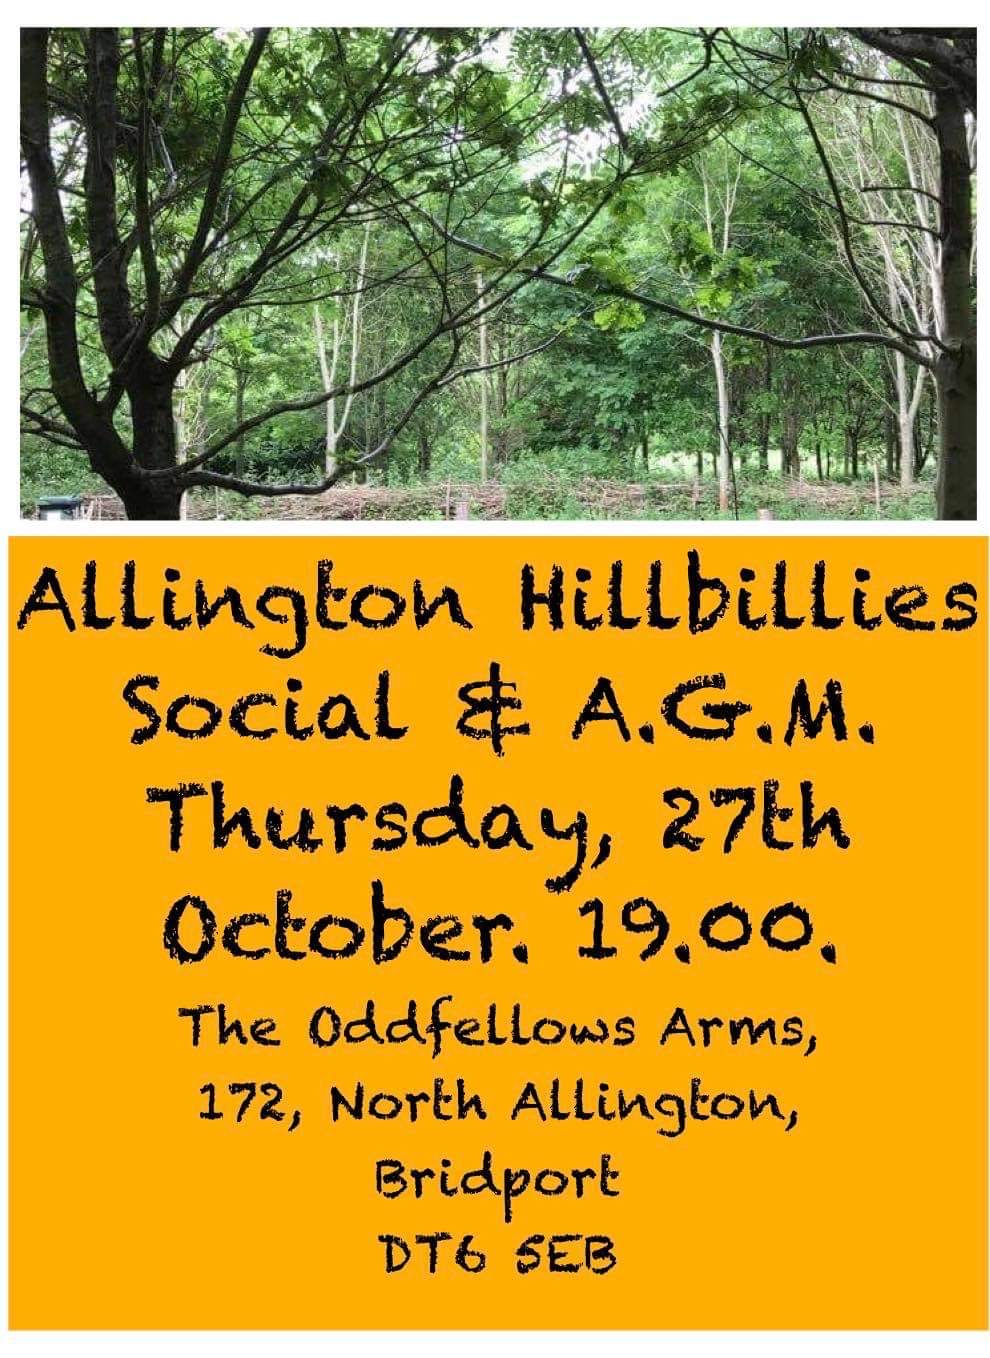 You are warmly invited to join the Hillbilly Volunteers for our AGM and social event.   Enjoy some food, have a drink and chat with the Hillbillies about the diverse activities we carry out on the Hill.